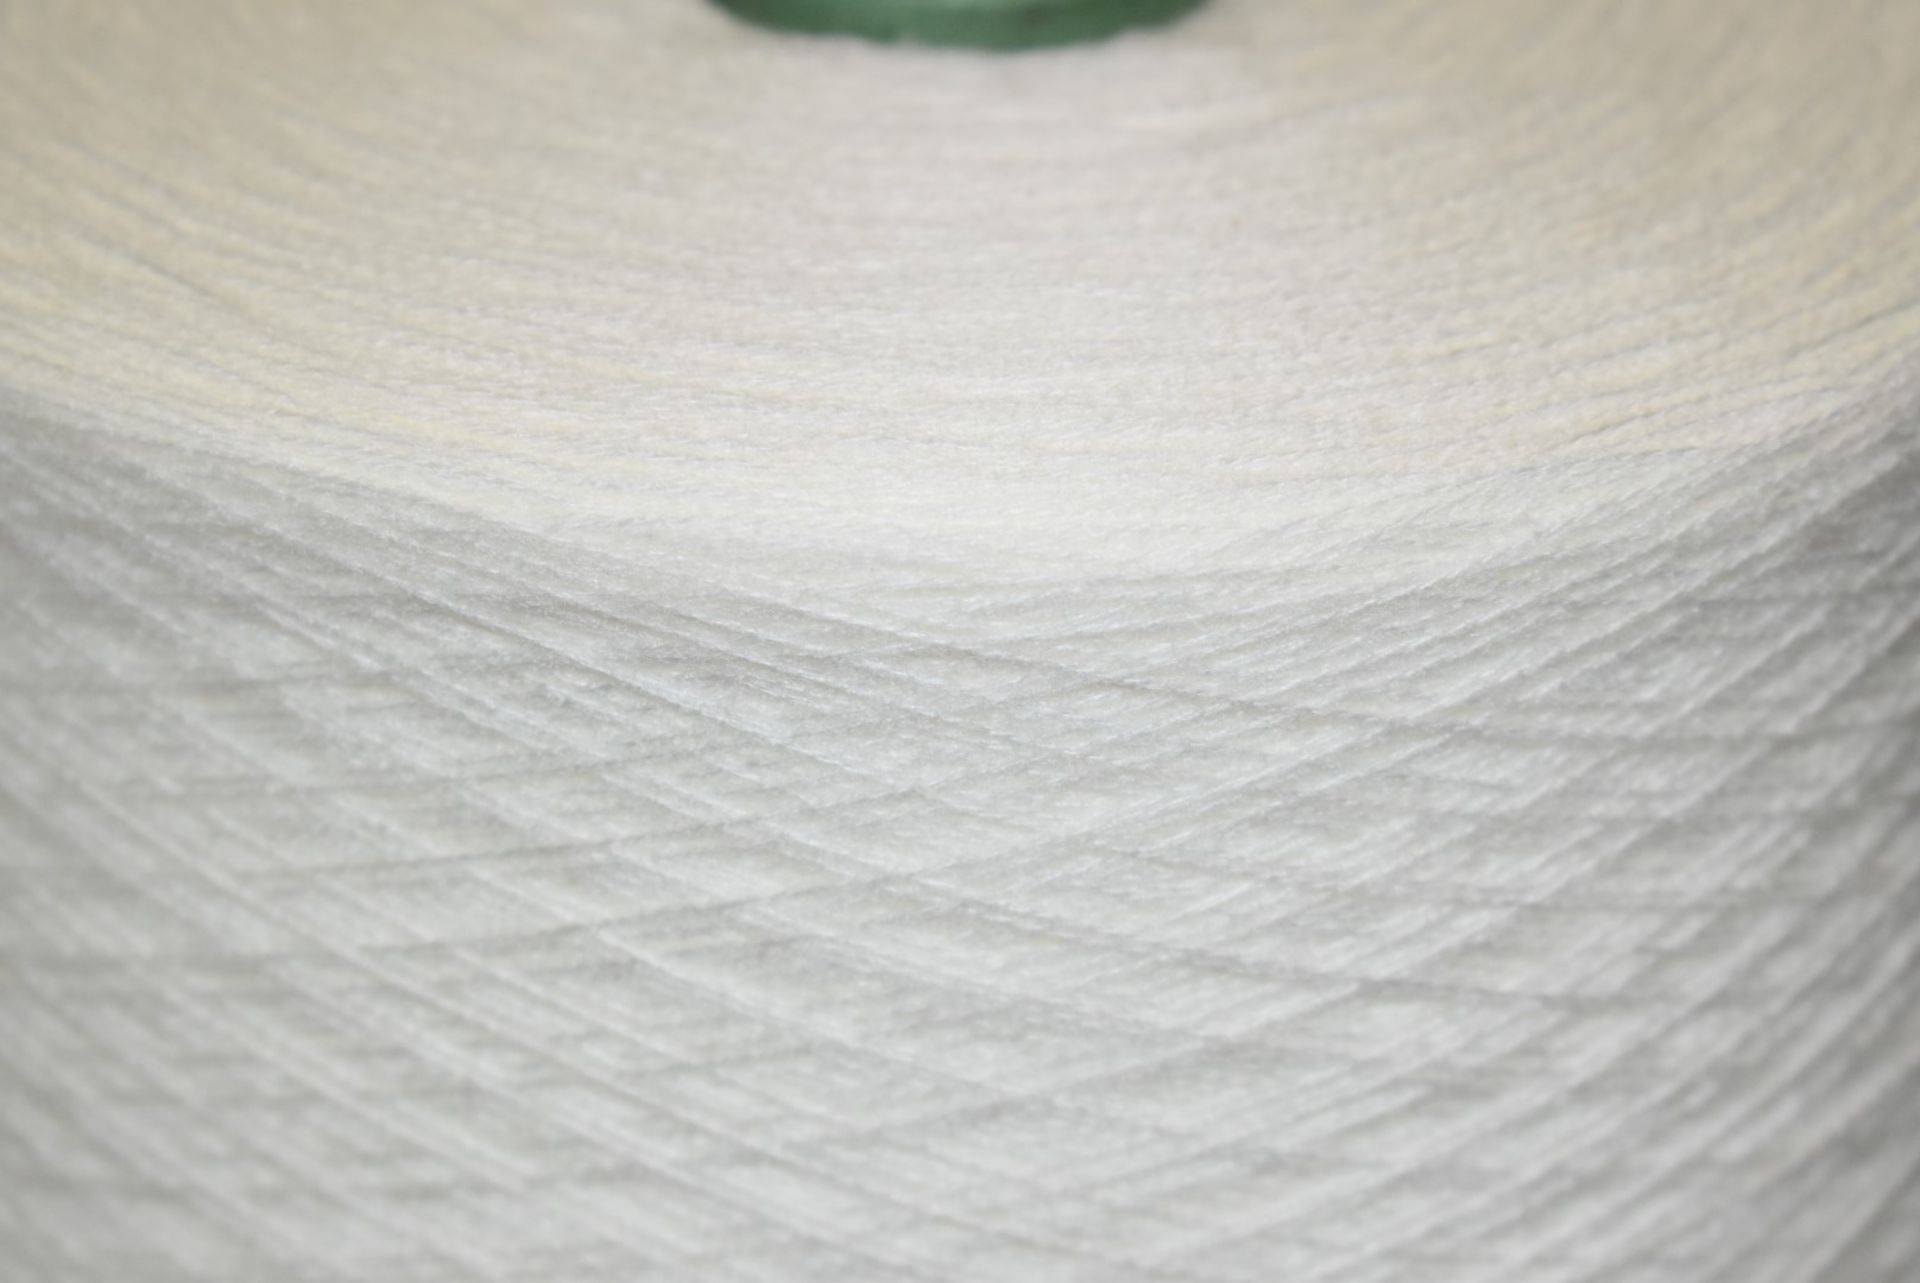 6 x Cones of 28/2 H.B 100% Acrylic Knitting Yarn - Colour: Ivory - Approx Weight: 1,300g - New Stock - Image 7 of 10